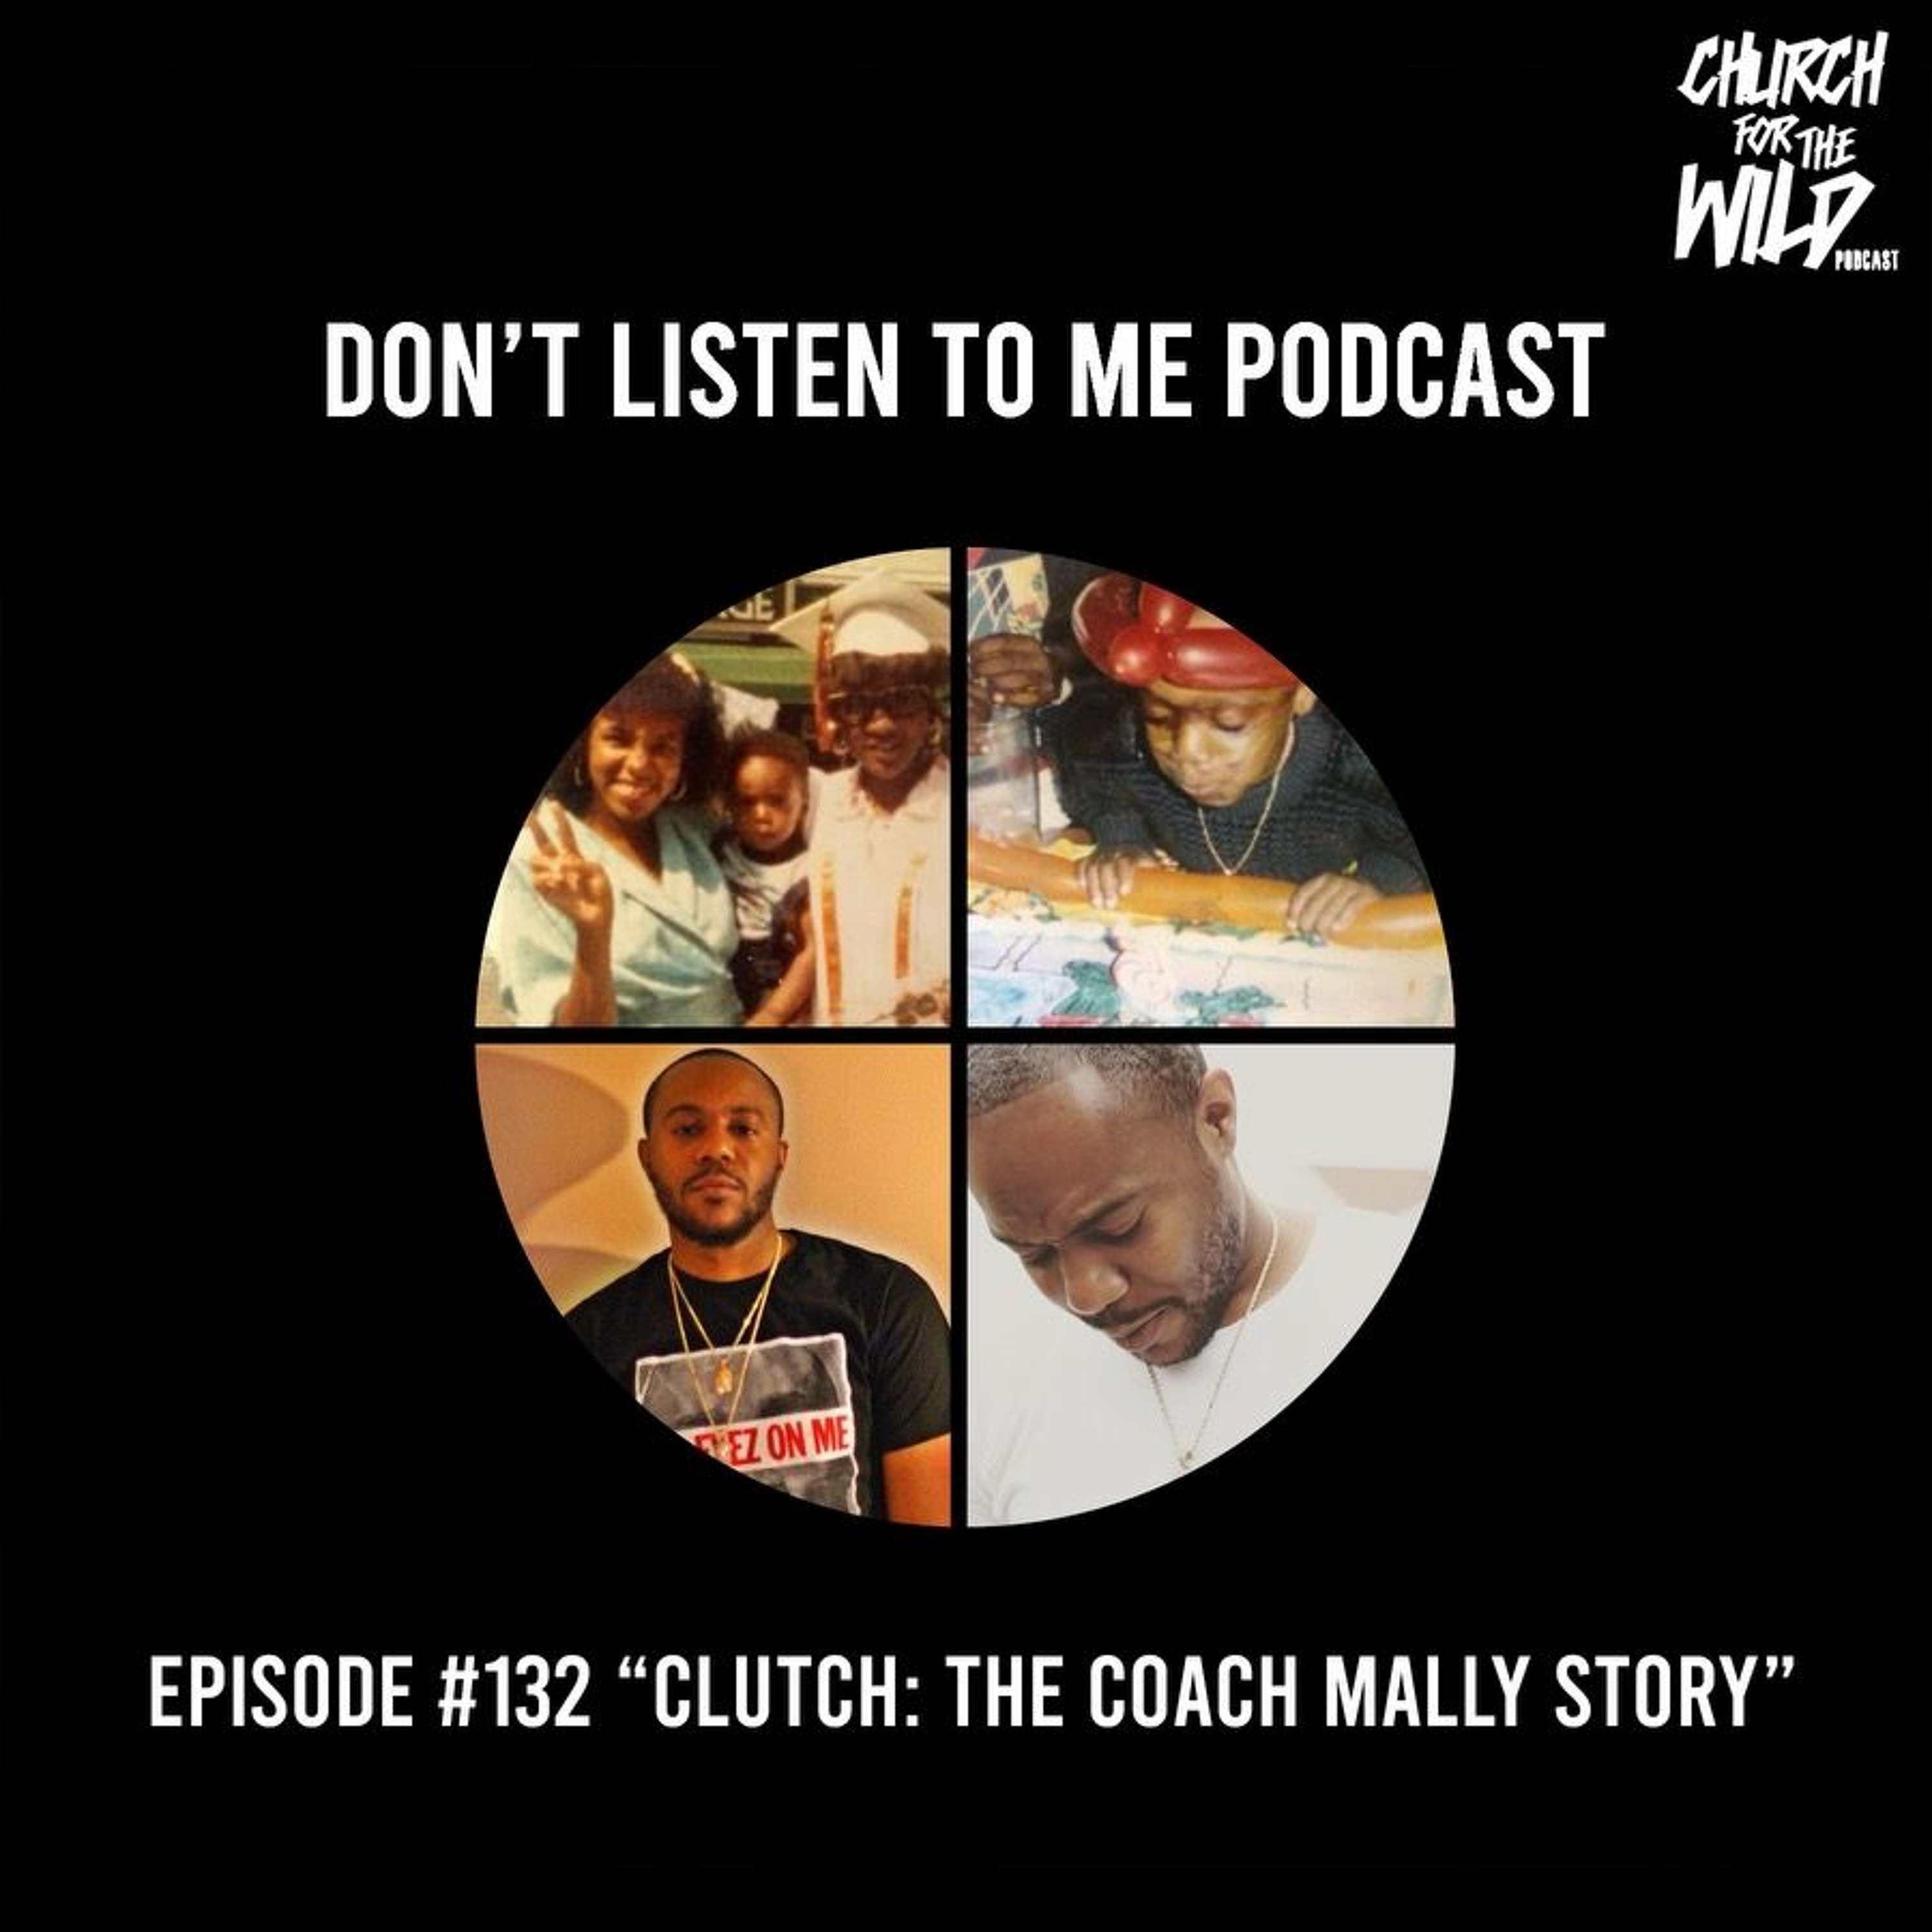 Don’t Listen To Me Episode 132: ”Clutch: The Coach Mally Story”